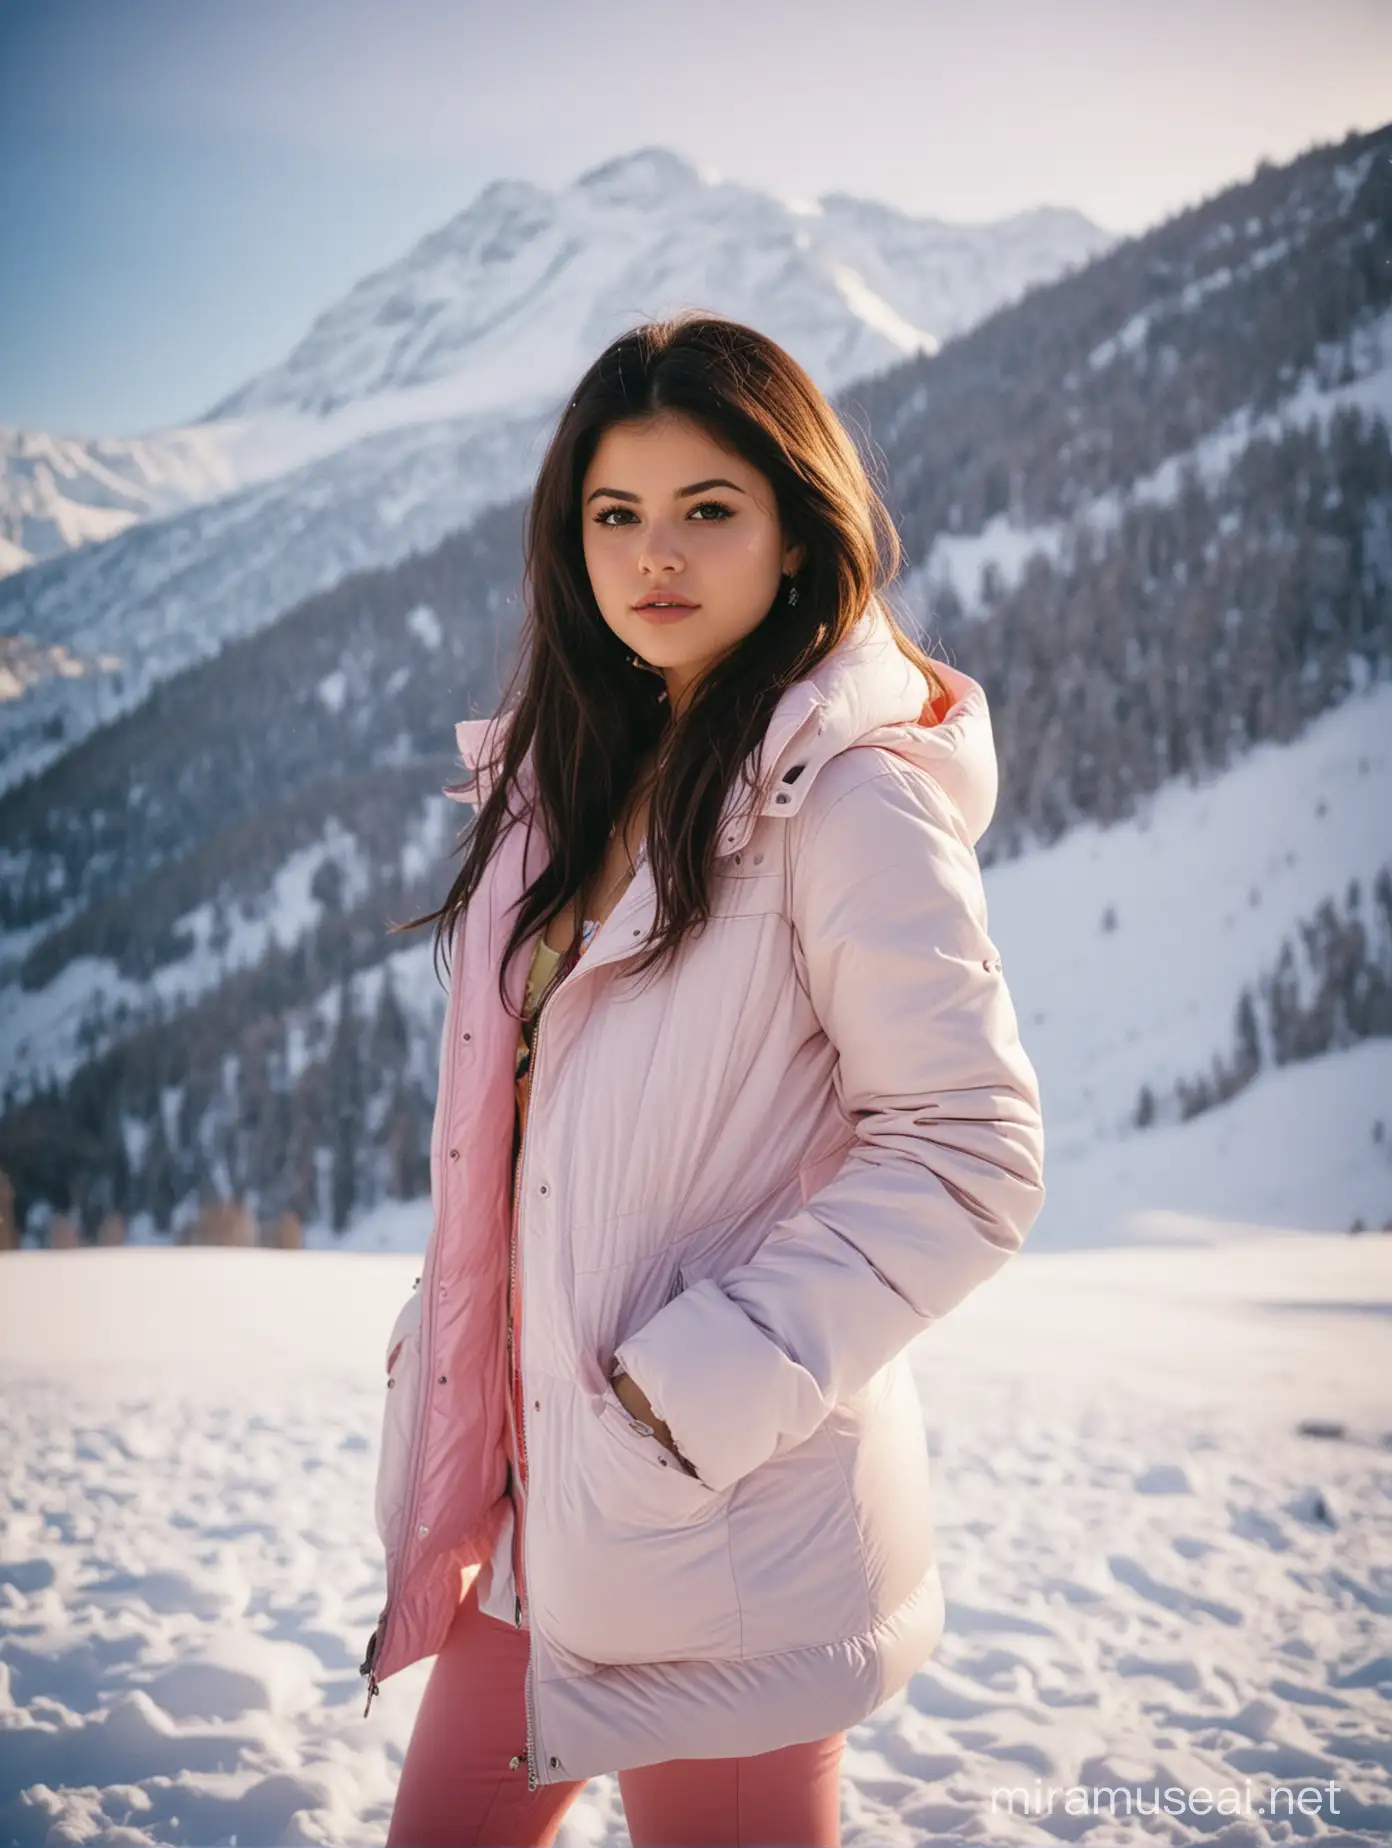 Beautiful Selena Gomez standing in the snowy mountains with colorful, perfect lighting. Shot with Leica Summicron 35mm f2.0 lens on Kodak Portra 400 film.